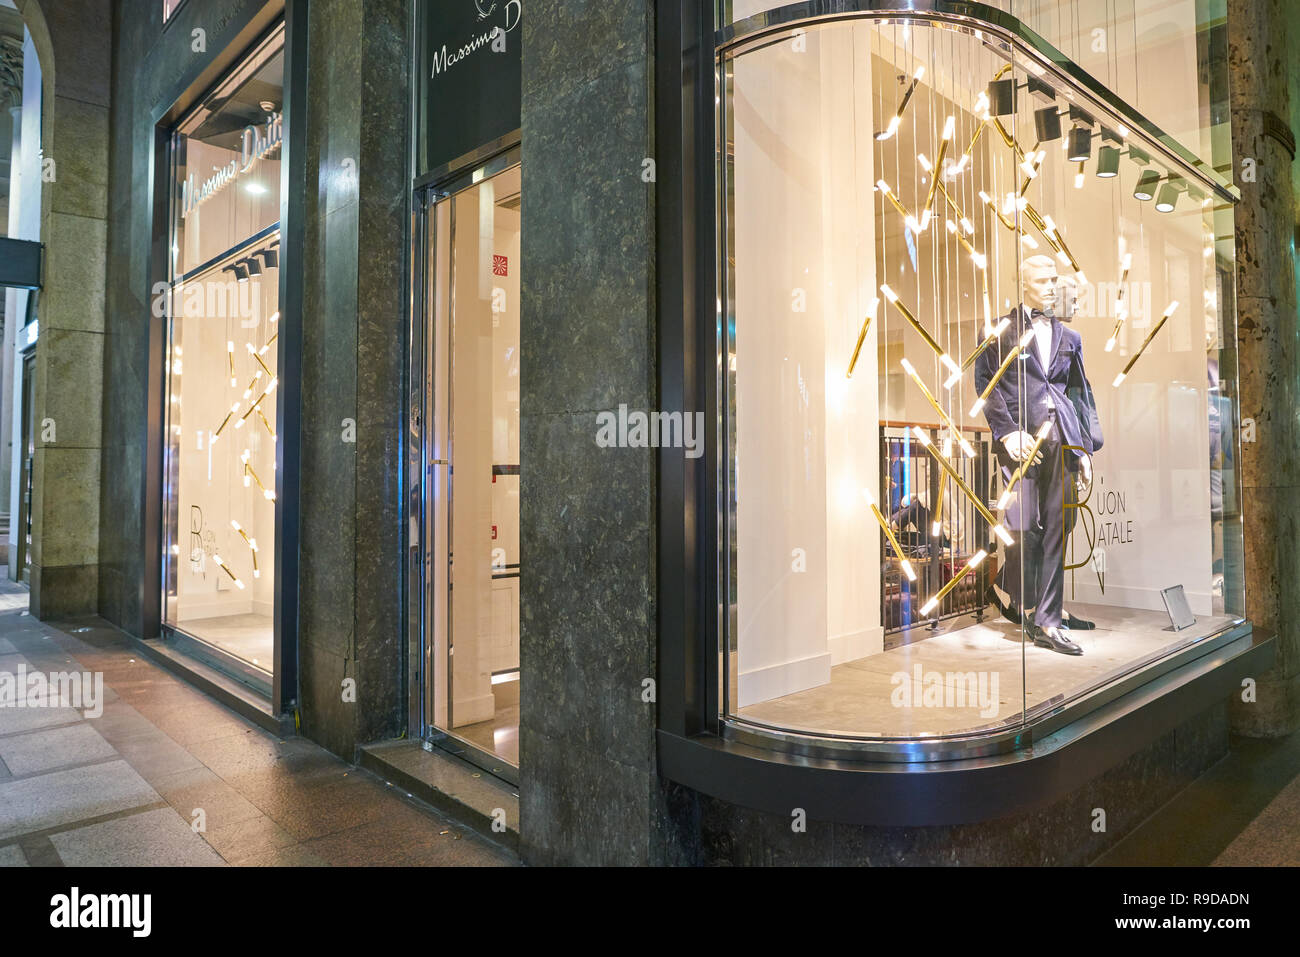 MILAN, ITALY - CIRCA NOVEMBER, 2017: shop window display of clothing at a Massimo  Dutti store in Milan, Italy Stock Photo - Alamy